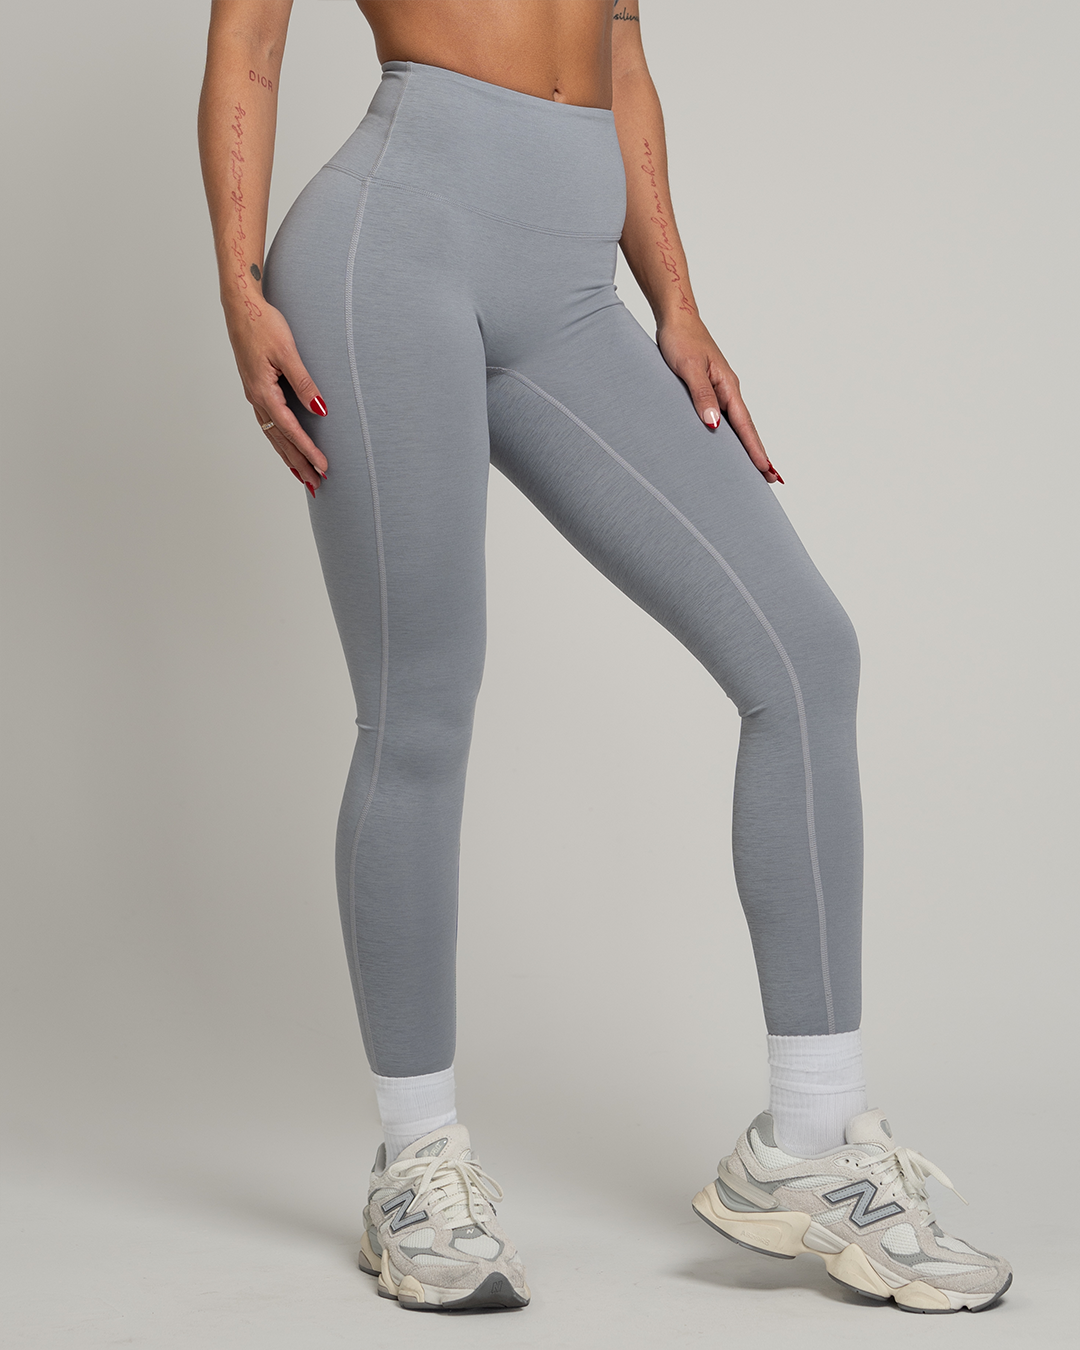 Booty Lifting Anti Cellulite Scrunch Leggings – The Old Captain Co.